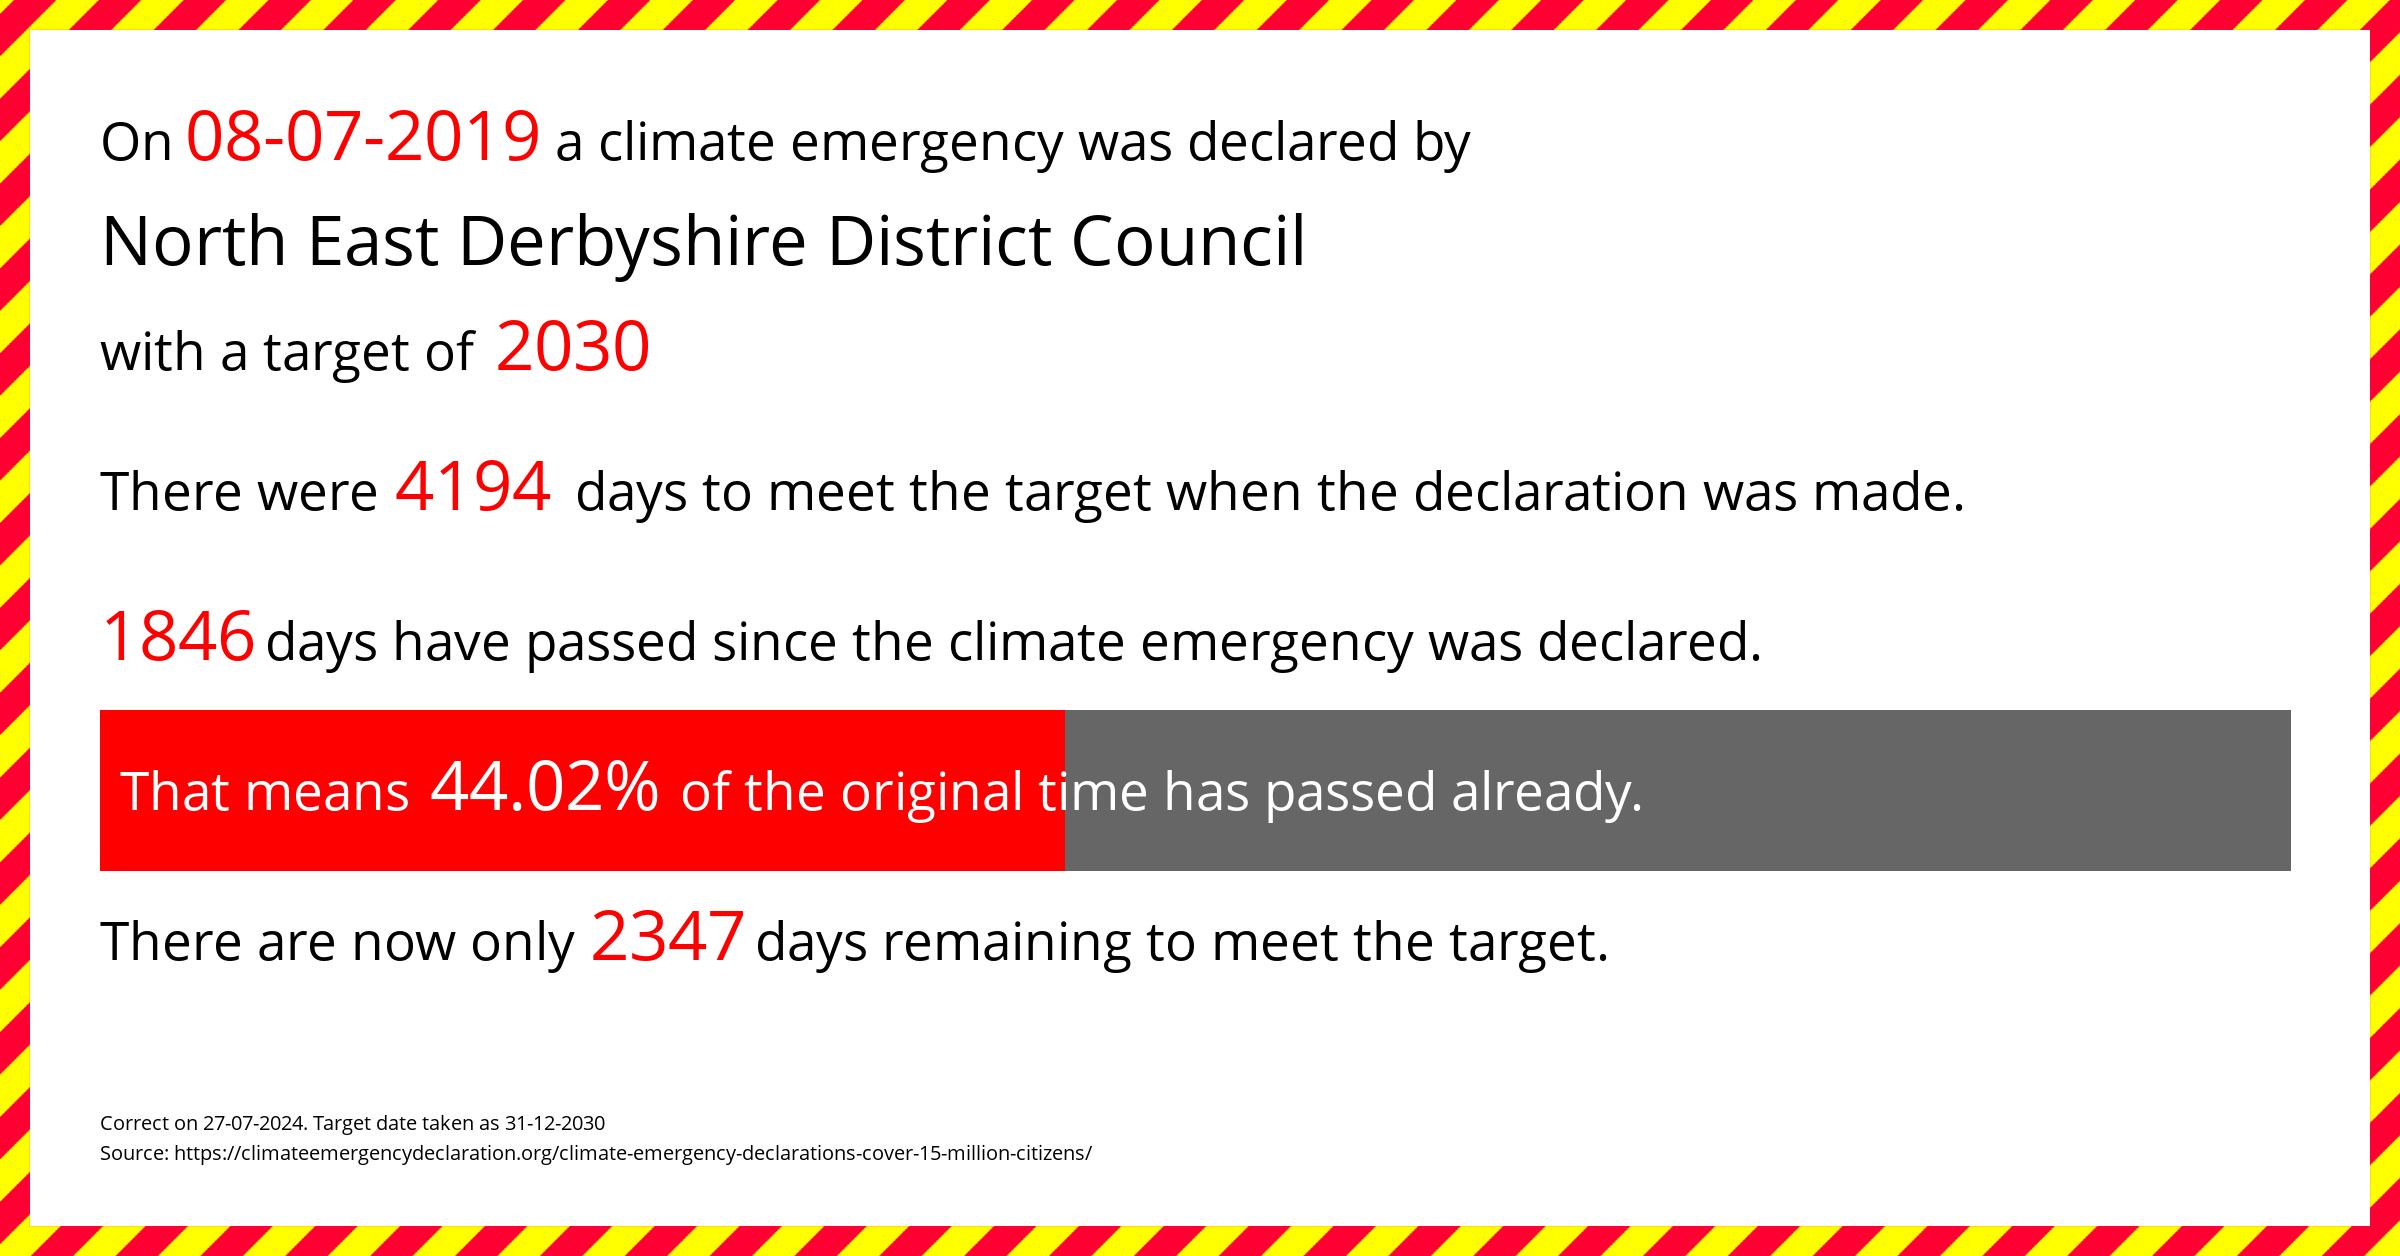 North East Derbyshire District Council declared a Climate emergency on Monday 8th July 2019, with a target of 2030.